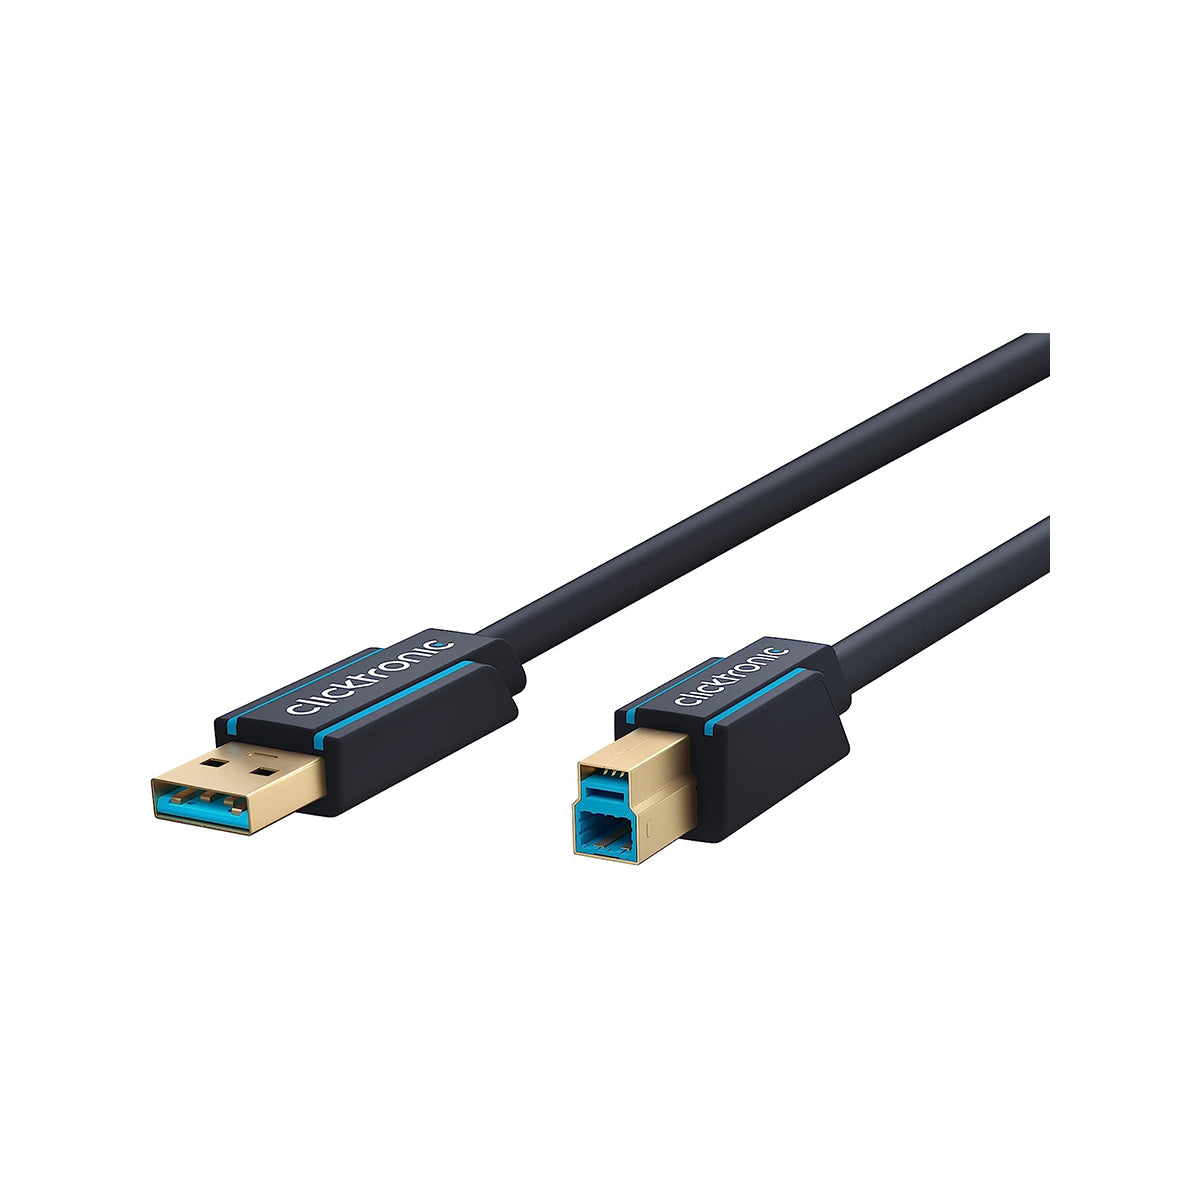 Clicktronic USB A to USB B 3.0 Cable - 1.8m